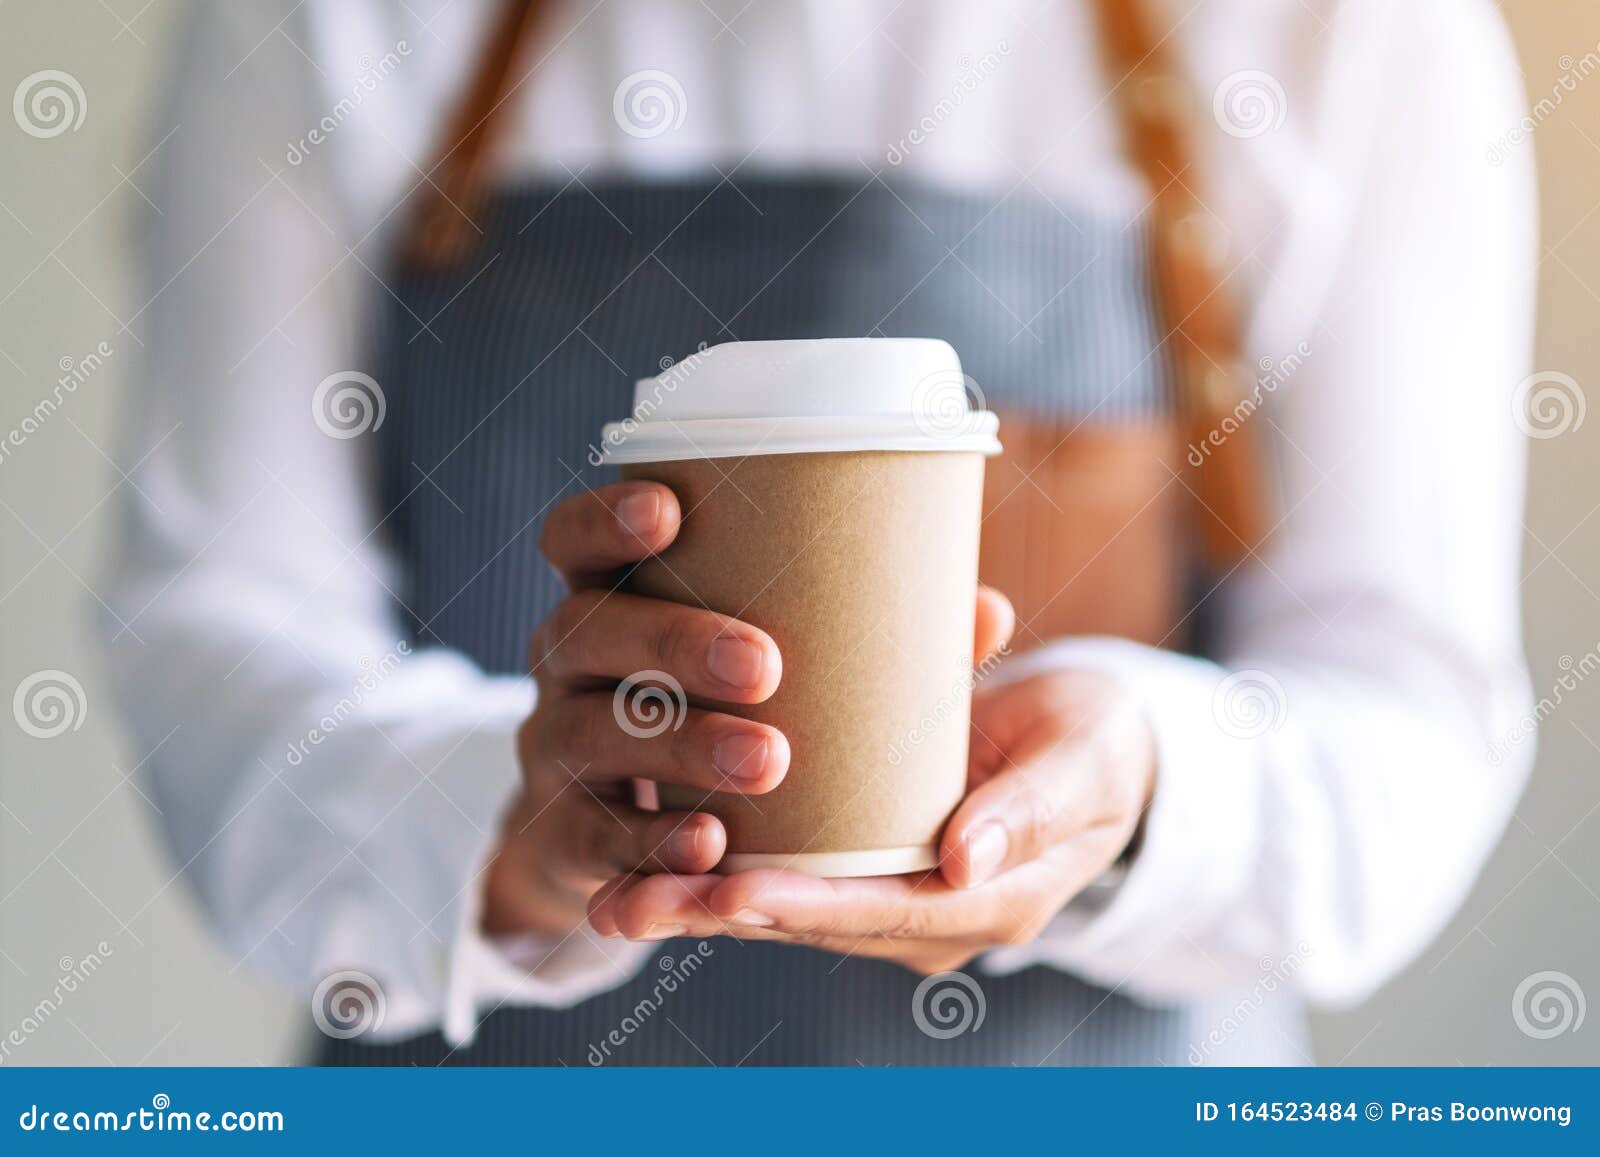 a waitress holding and serving a paper cup of hot coffee